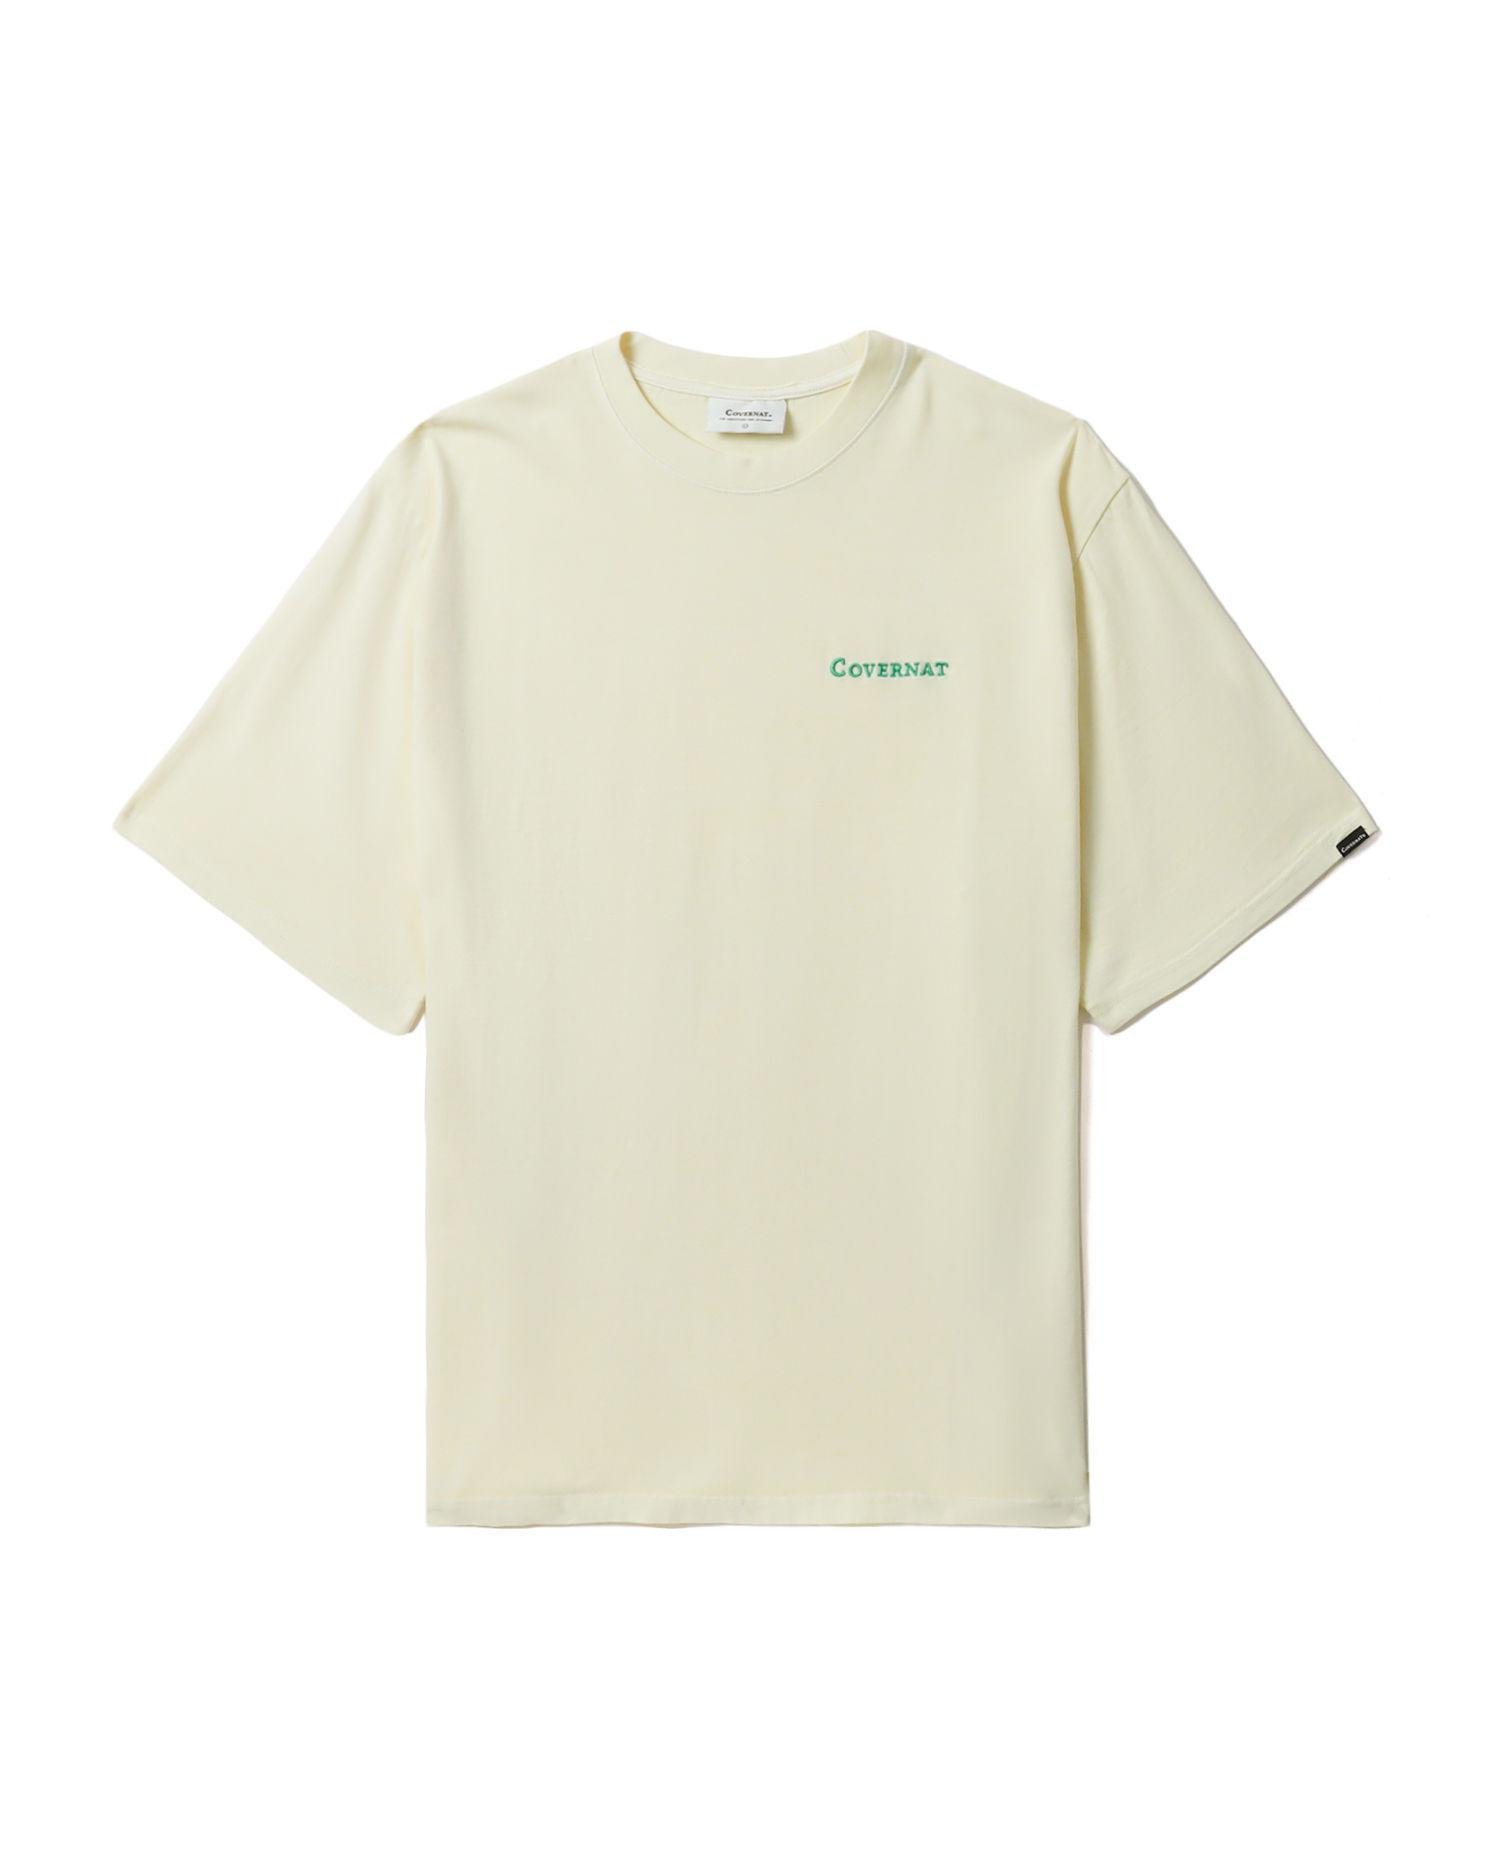 Embroidered logo tee by COVERNAT